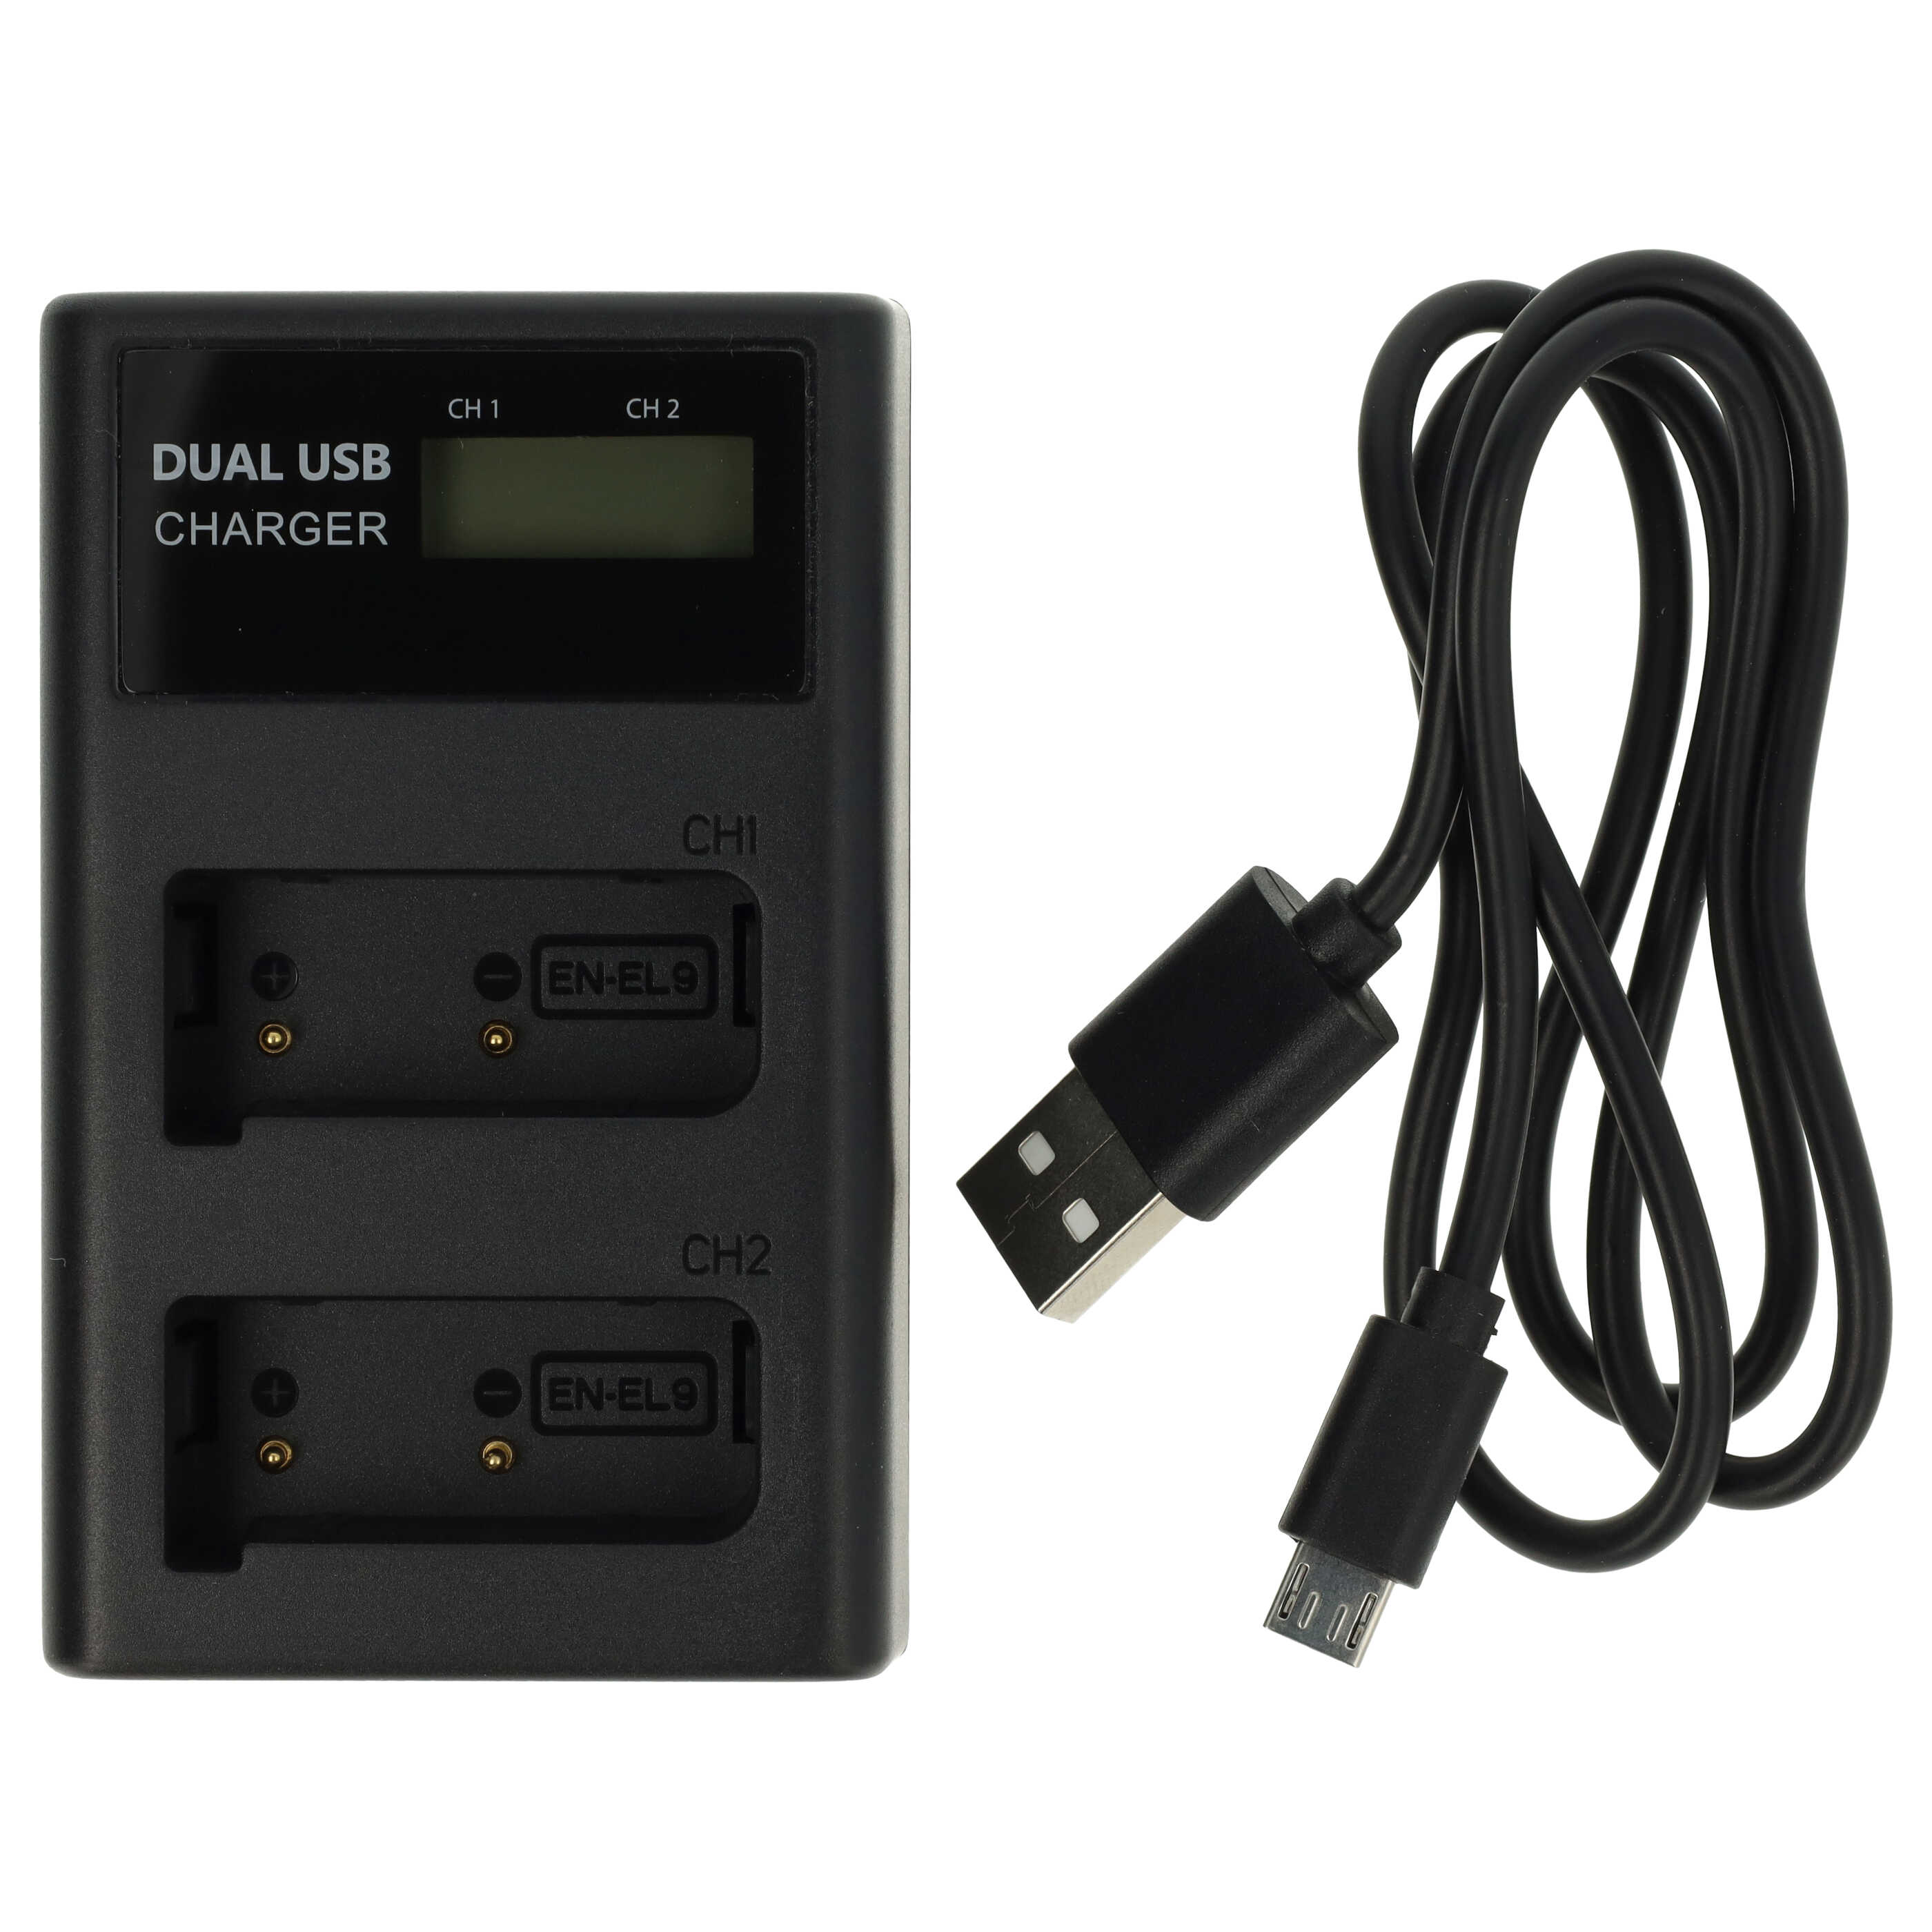 Battery Charger suitable for D3000 Camera etc. - 0.5 A, 8.4 V